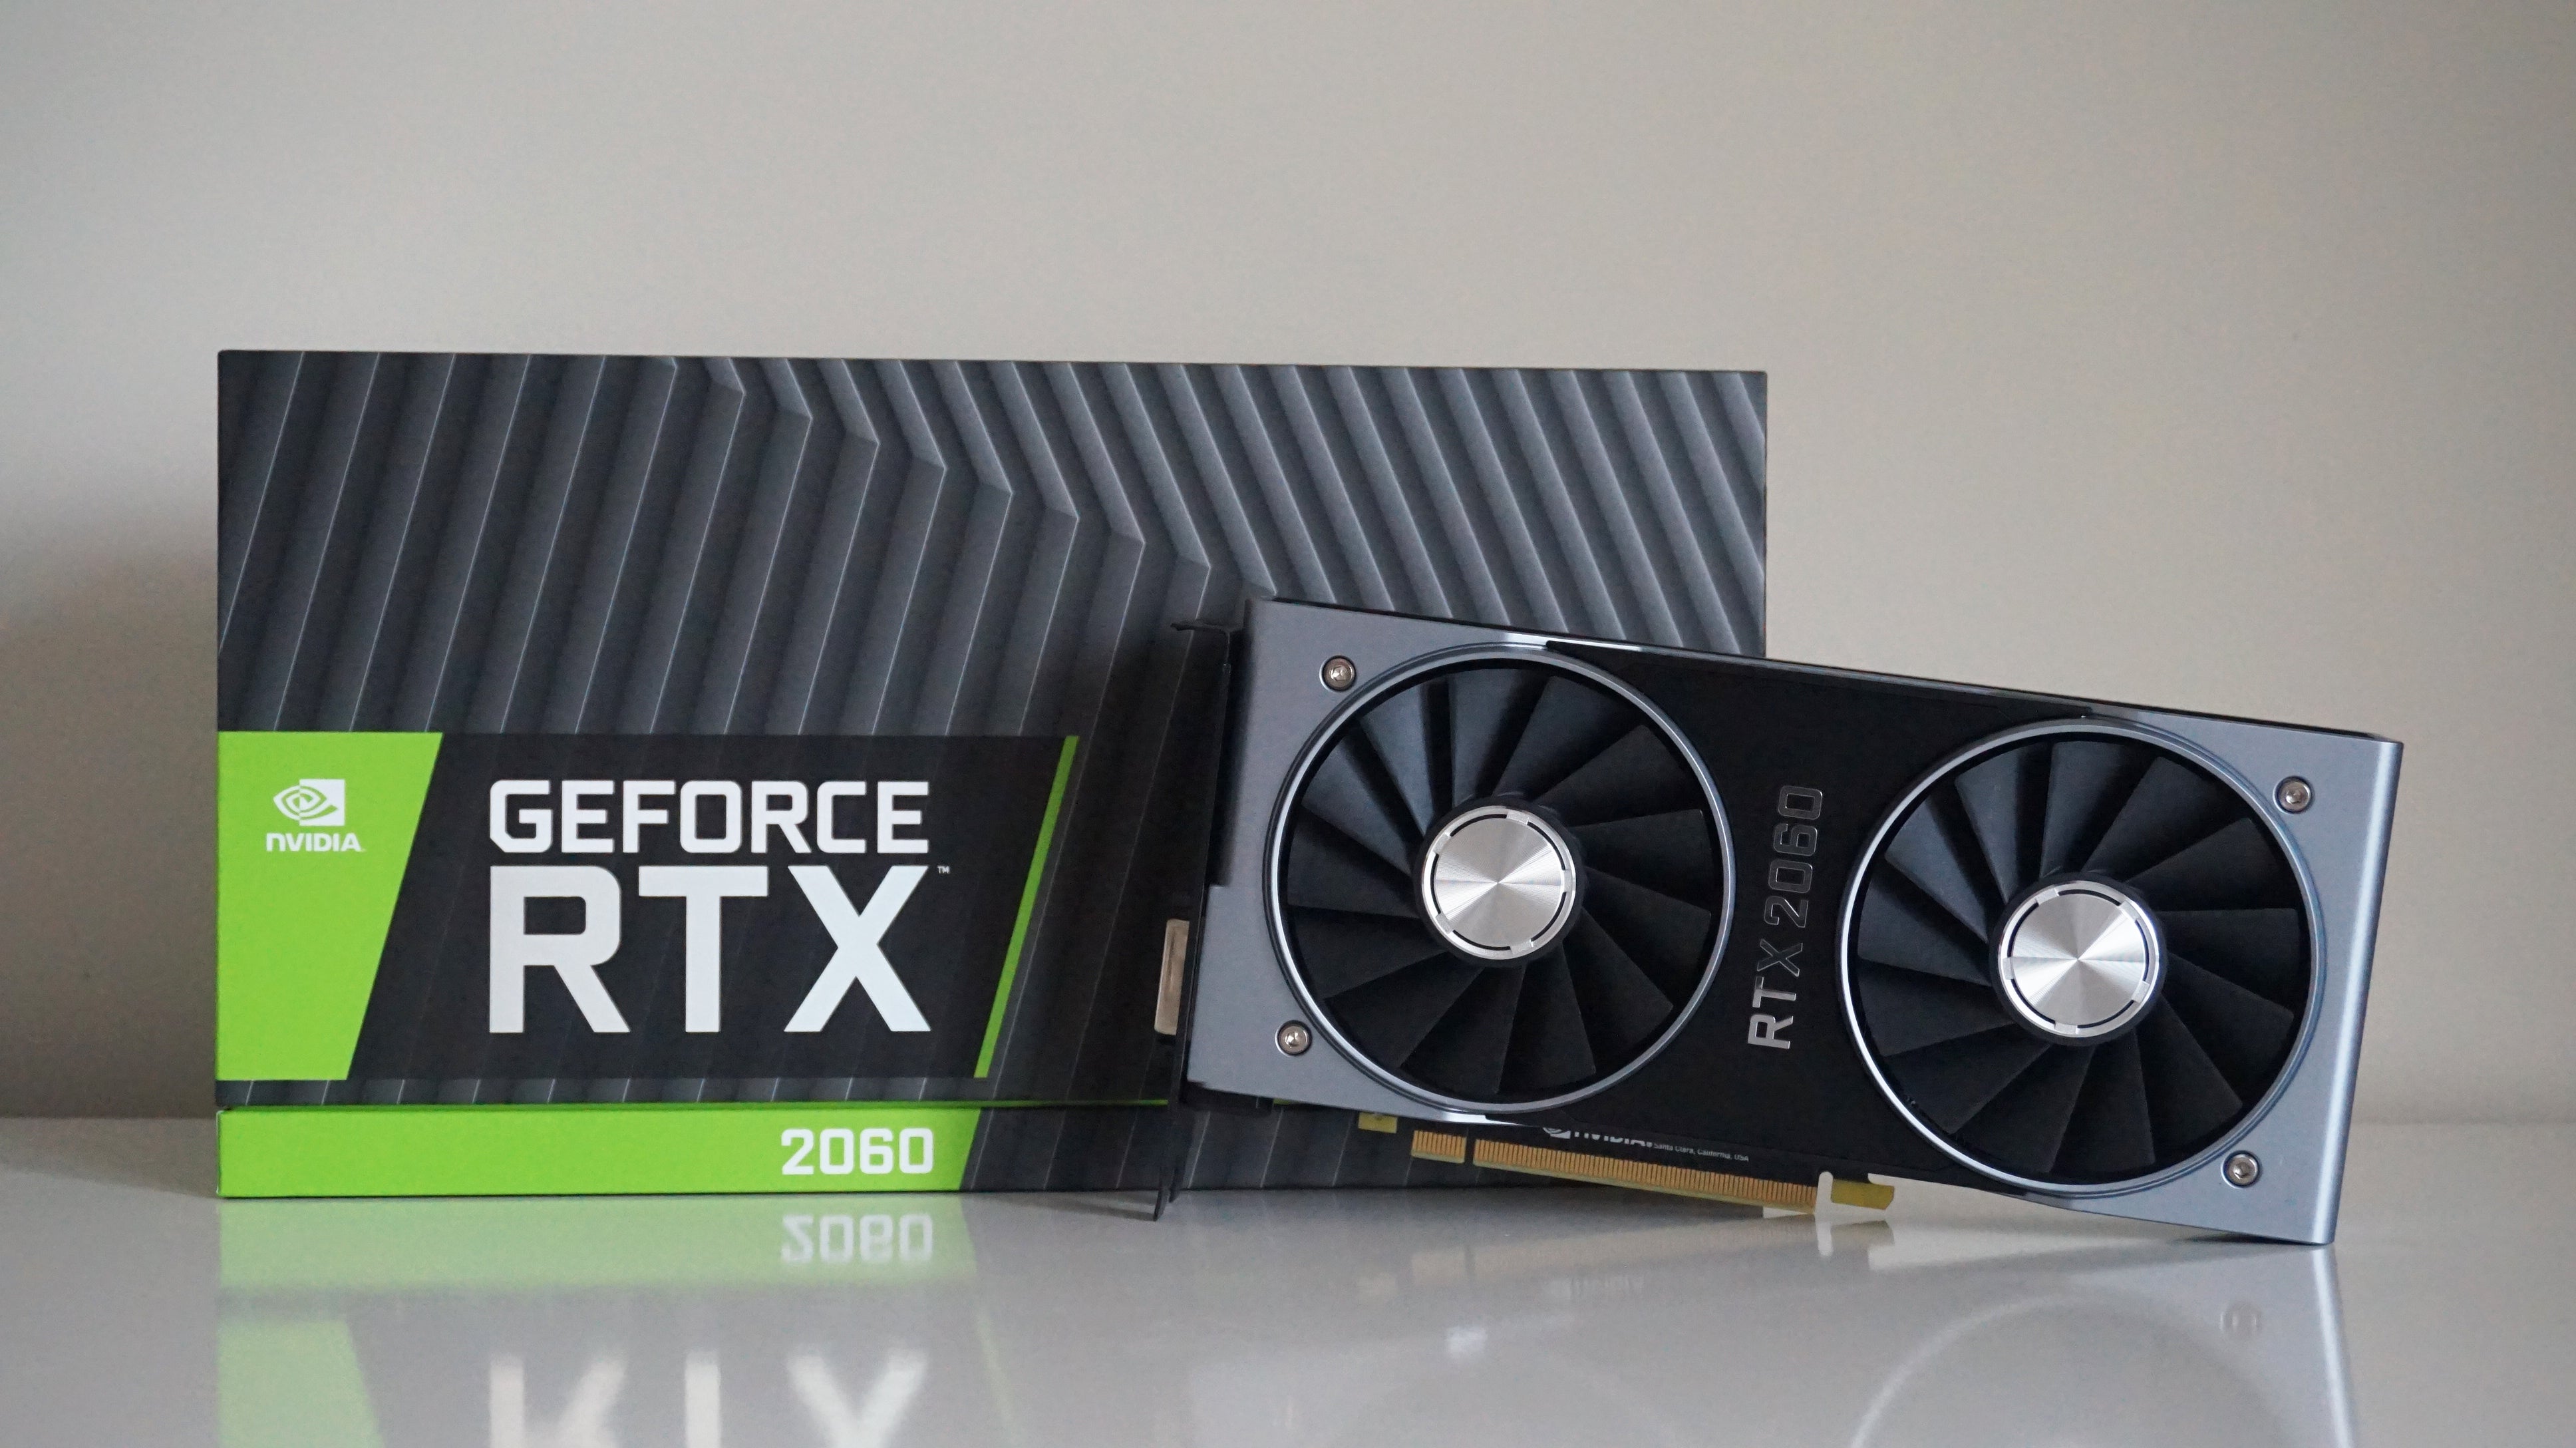 Chaiselong End længes efter Nvidia GeForce RTX 2060 review: The new best graphics card for 1440p gaming  | Rock Paper Shotgun